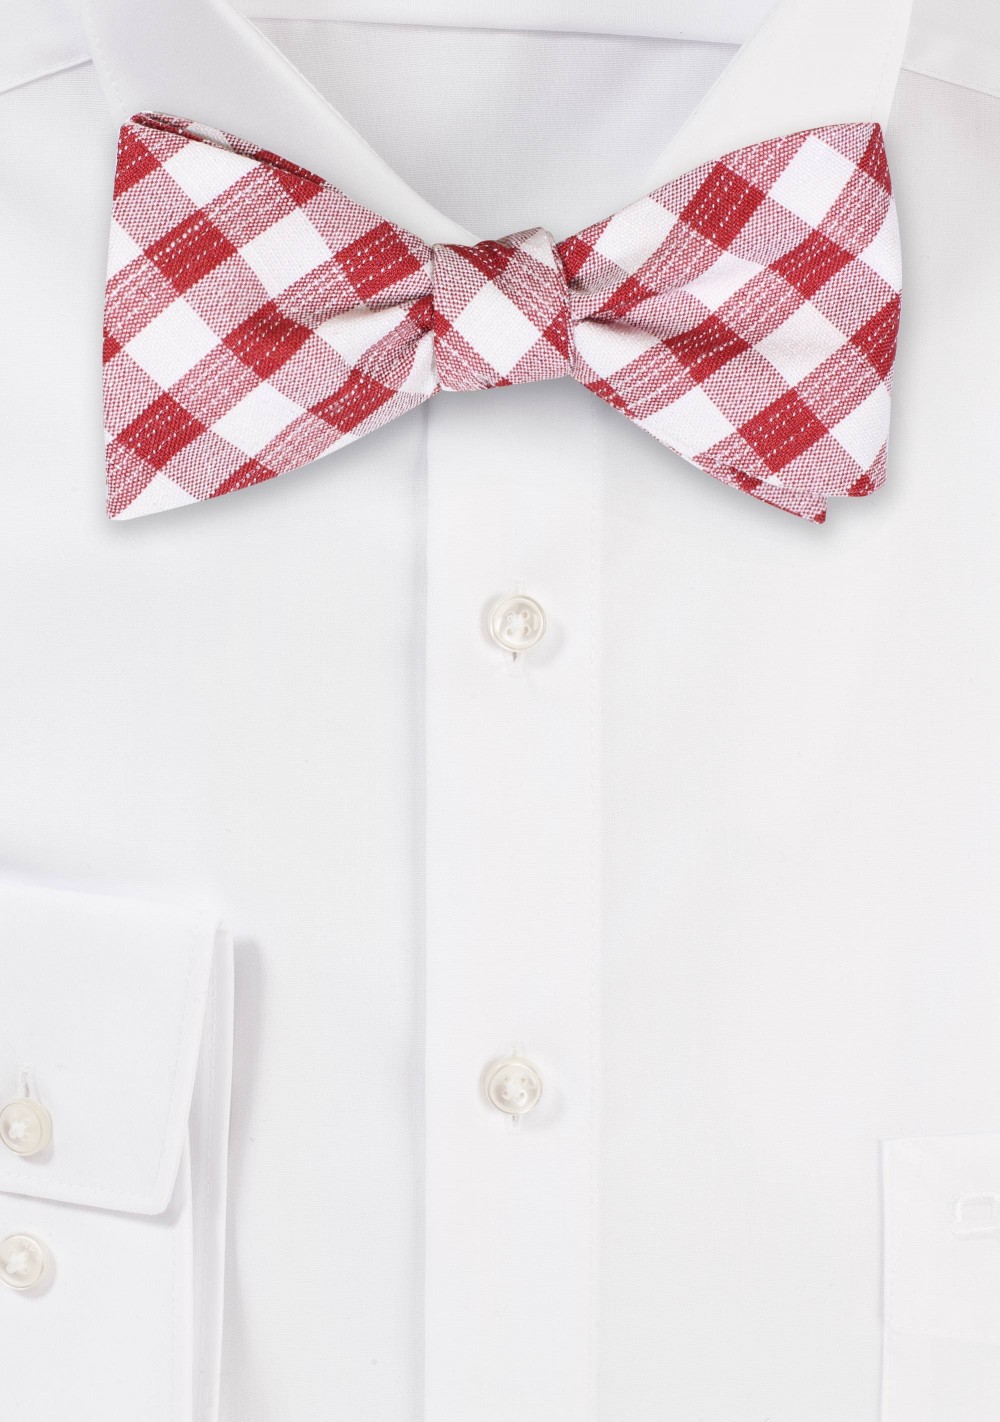 Gingham Check Bowtie in Wine and White